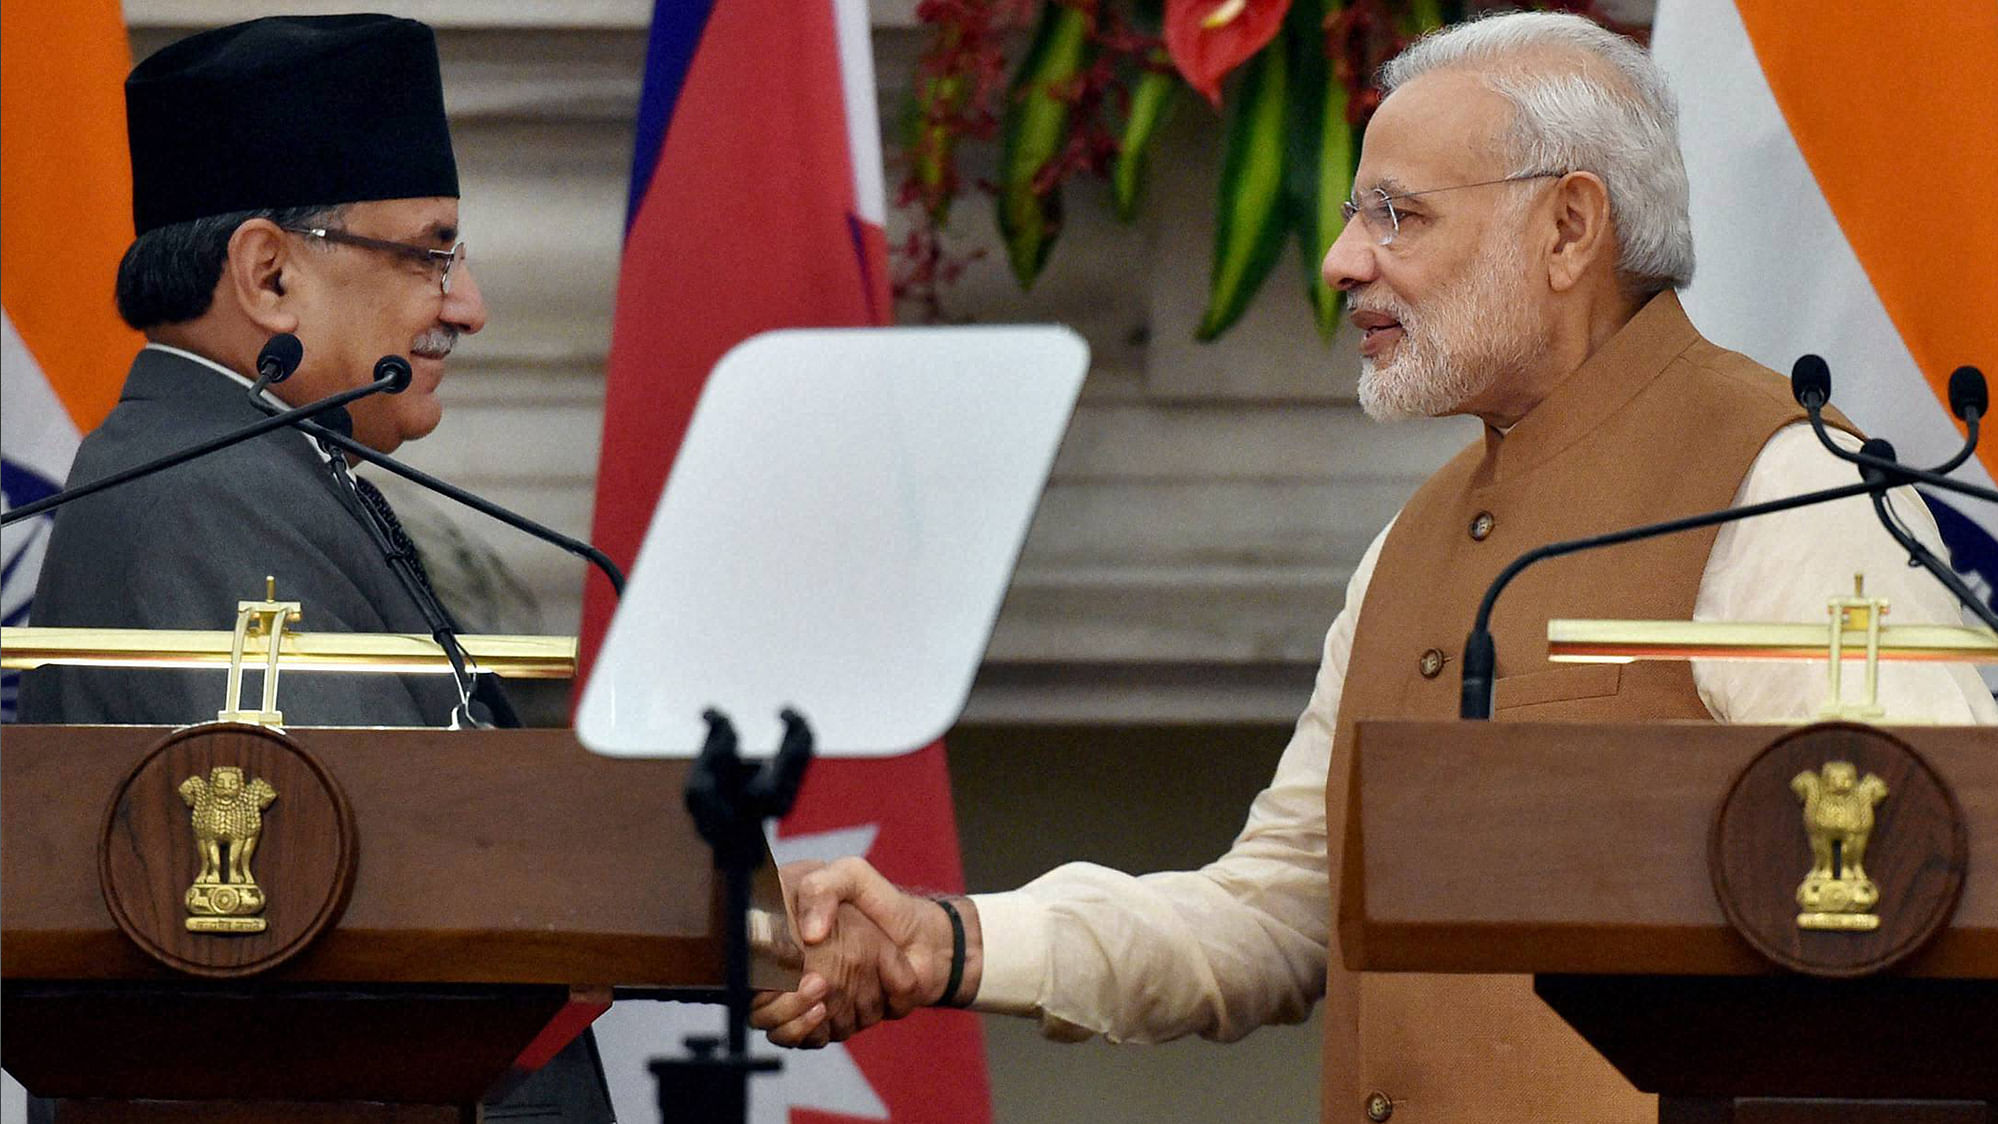 Prime Minister Narendra Modi and his Nepalese counterpart Pushpa Kamal Dahal shake hands after a joint statement at Hyderabad house in New Delhi on Friday. (Photo: PTI)